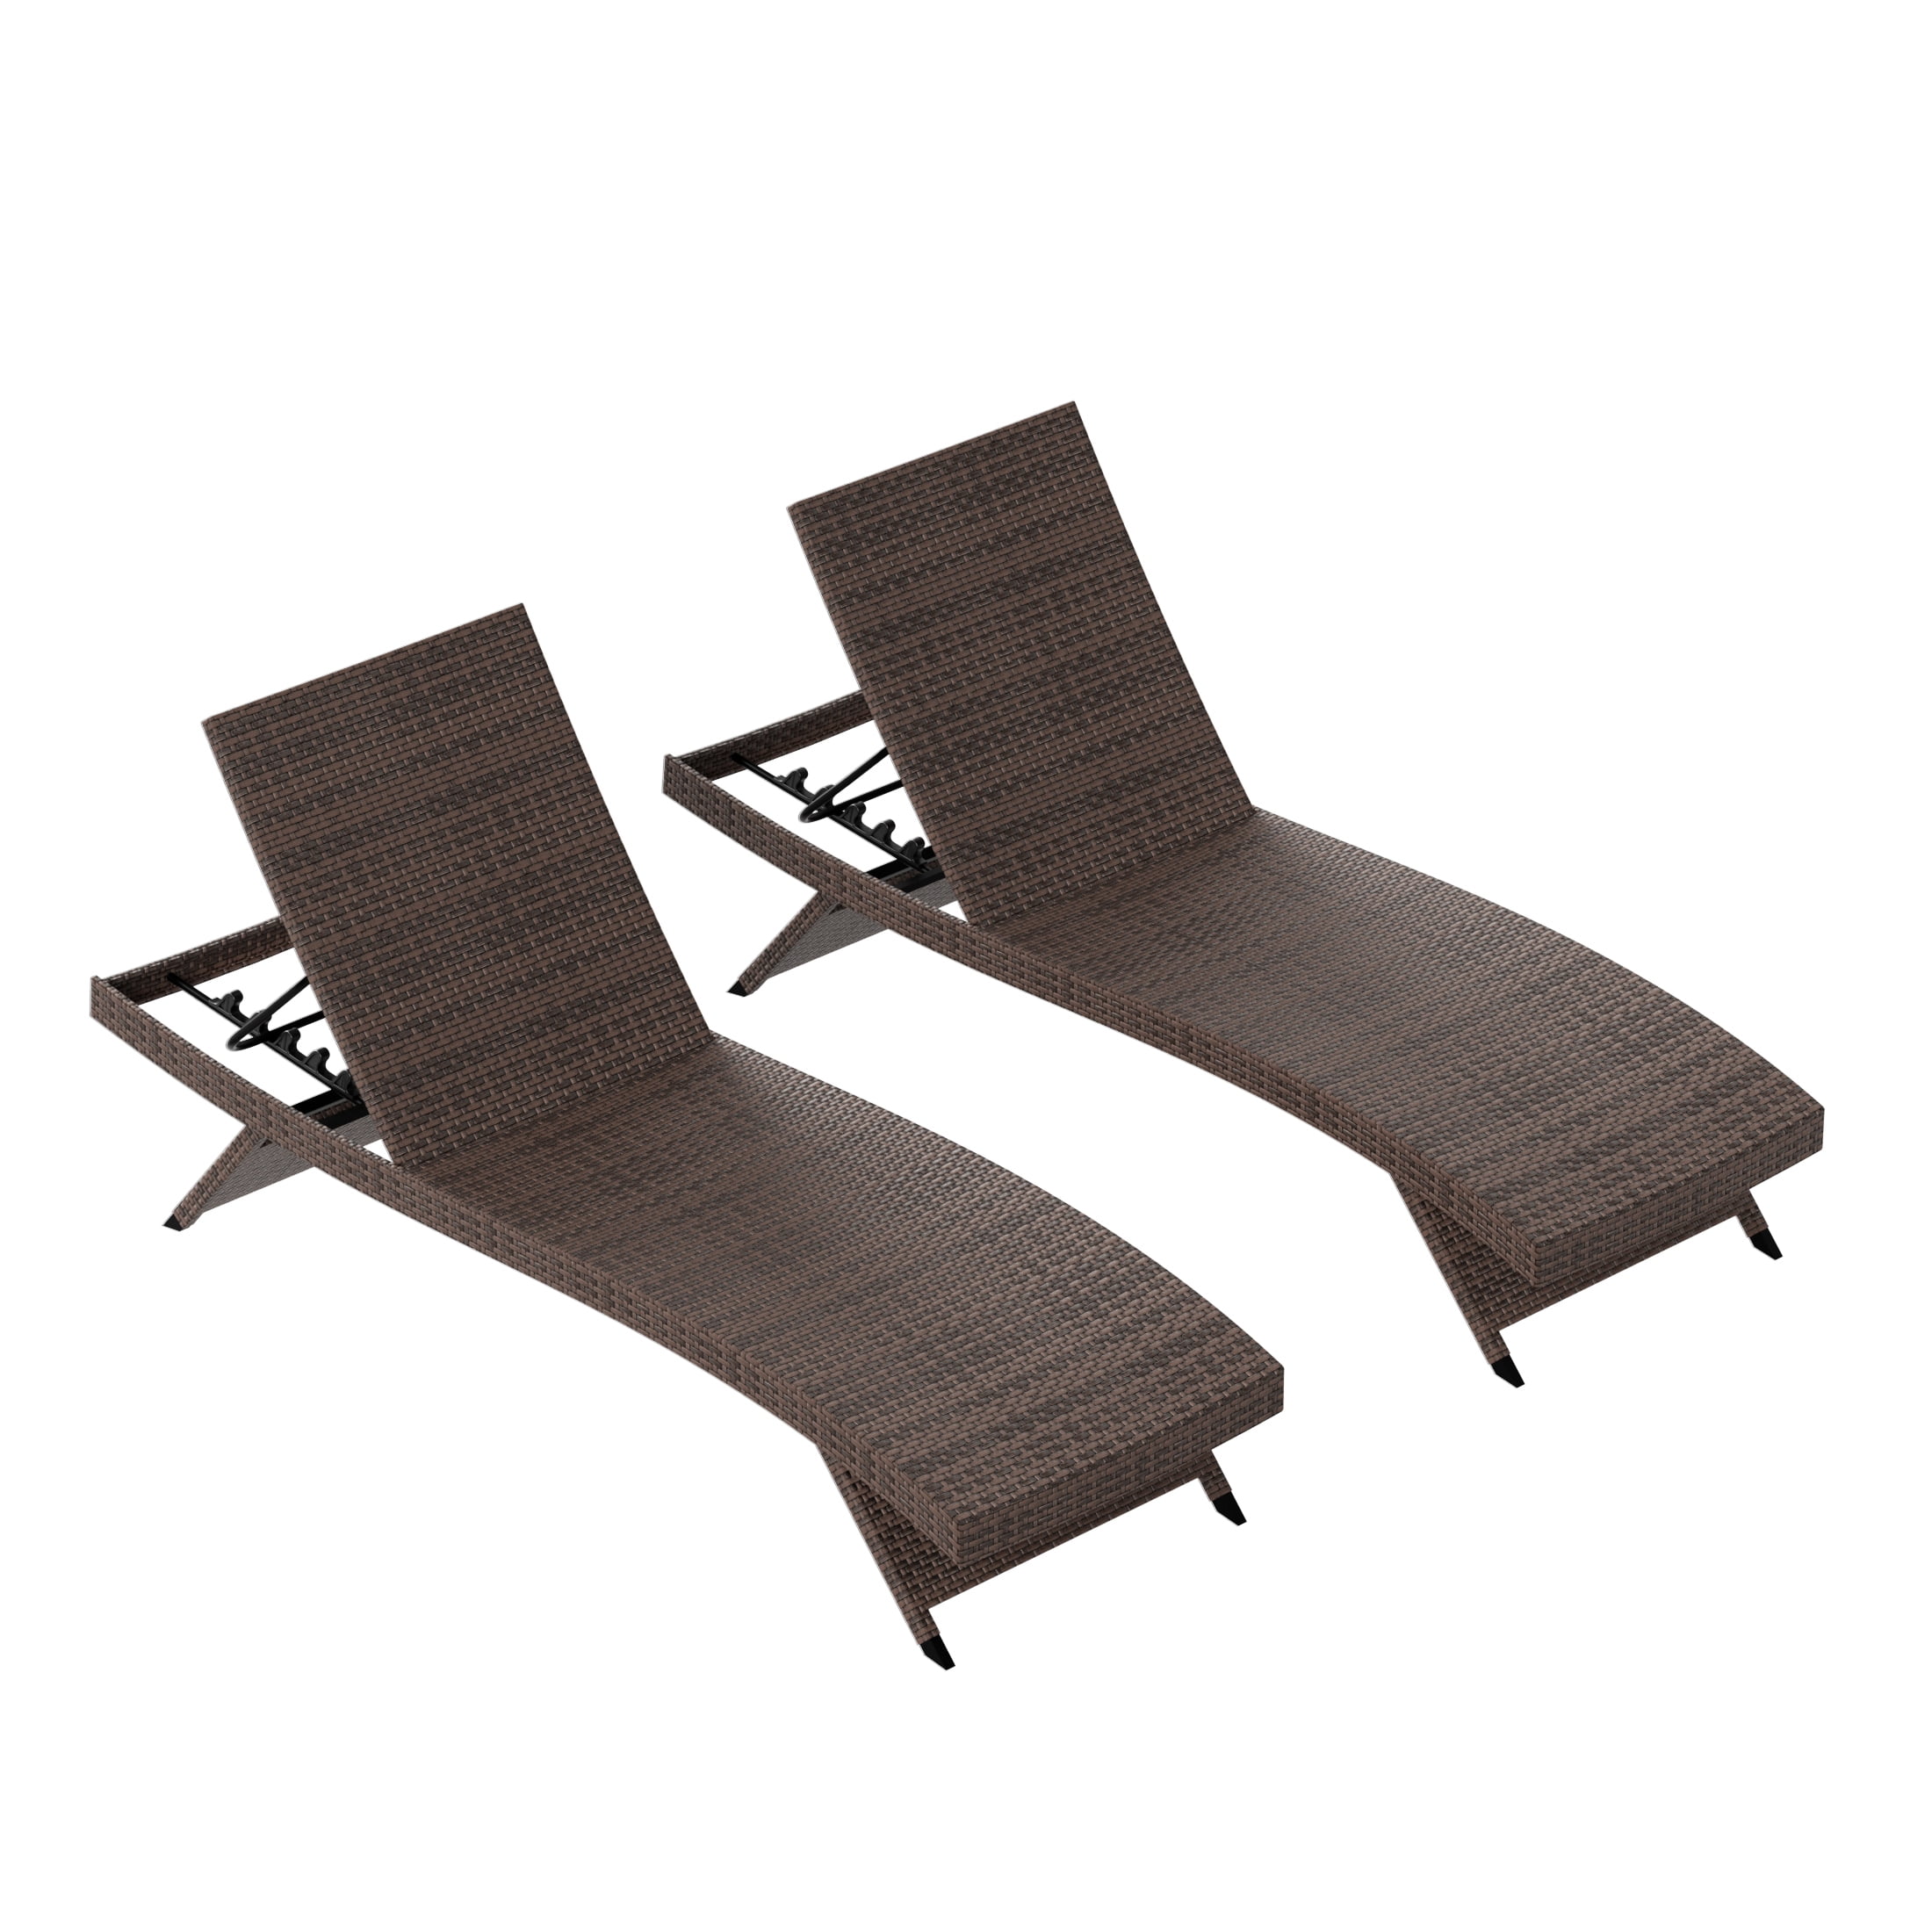 WestinTrends Somerset Wicker Double Chaise Lounge, All Weather PE Rattan Folding Outdoor Lounge Chairs Set of 2 Pool Chairs with Adjustable Backrest, Brown - image 1 of 8